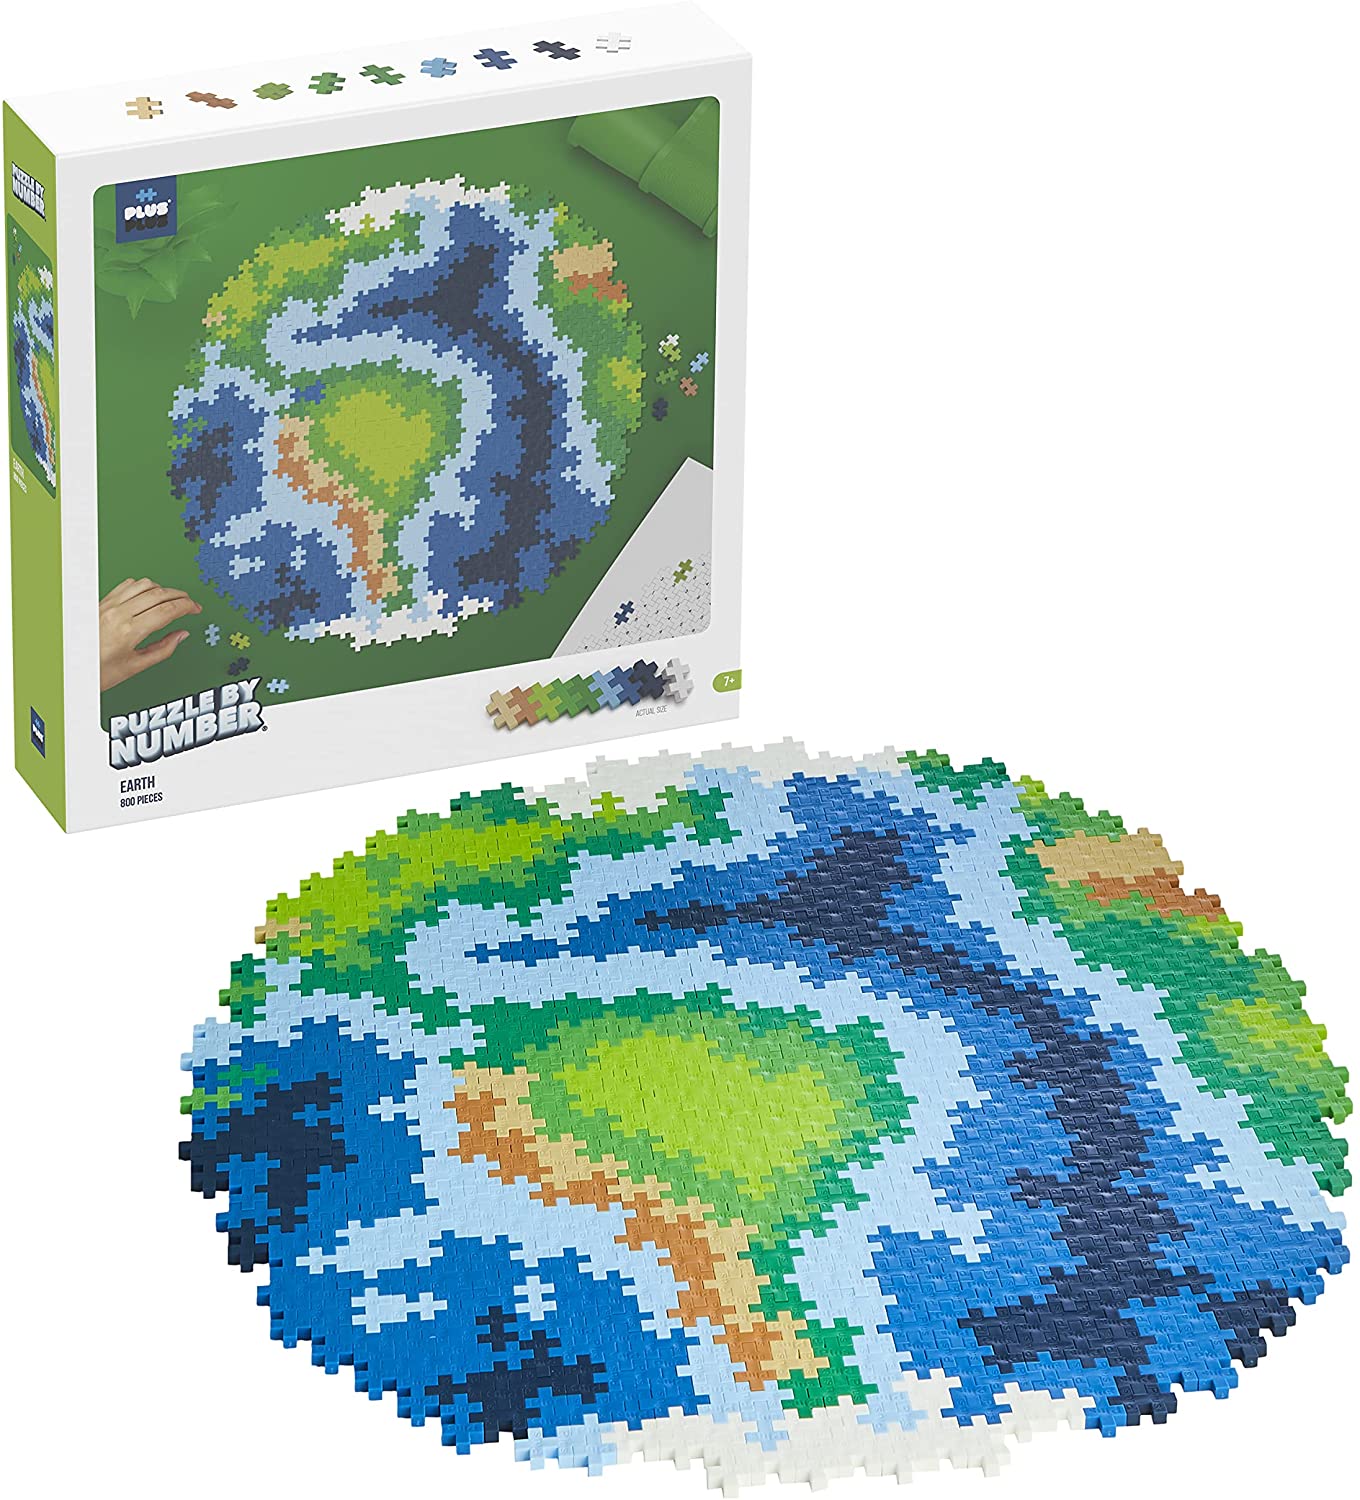 Puzzle By Number Earth 800 Pc by Plus Plus #5104